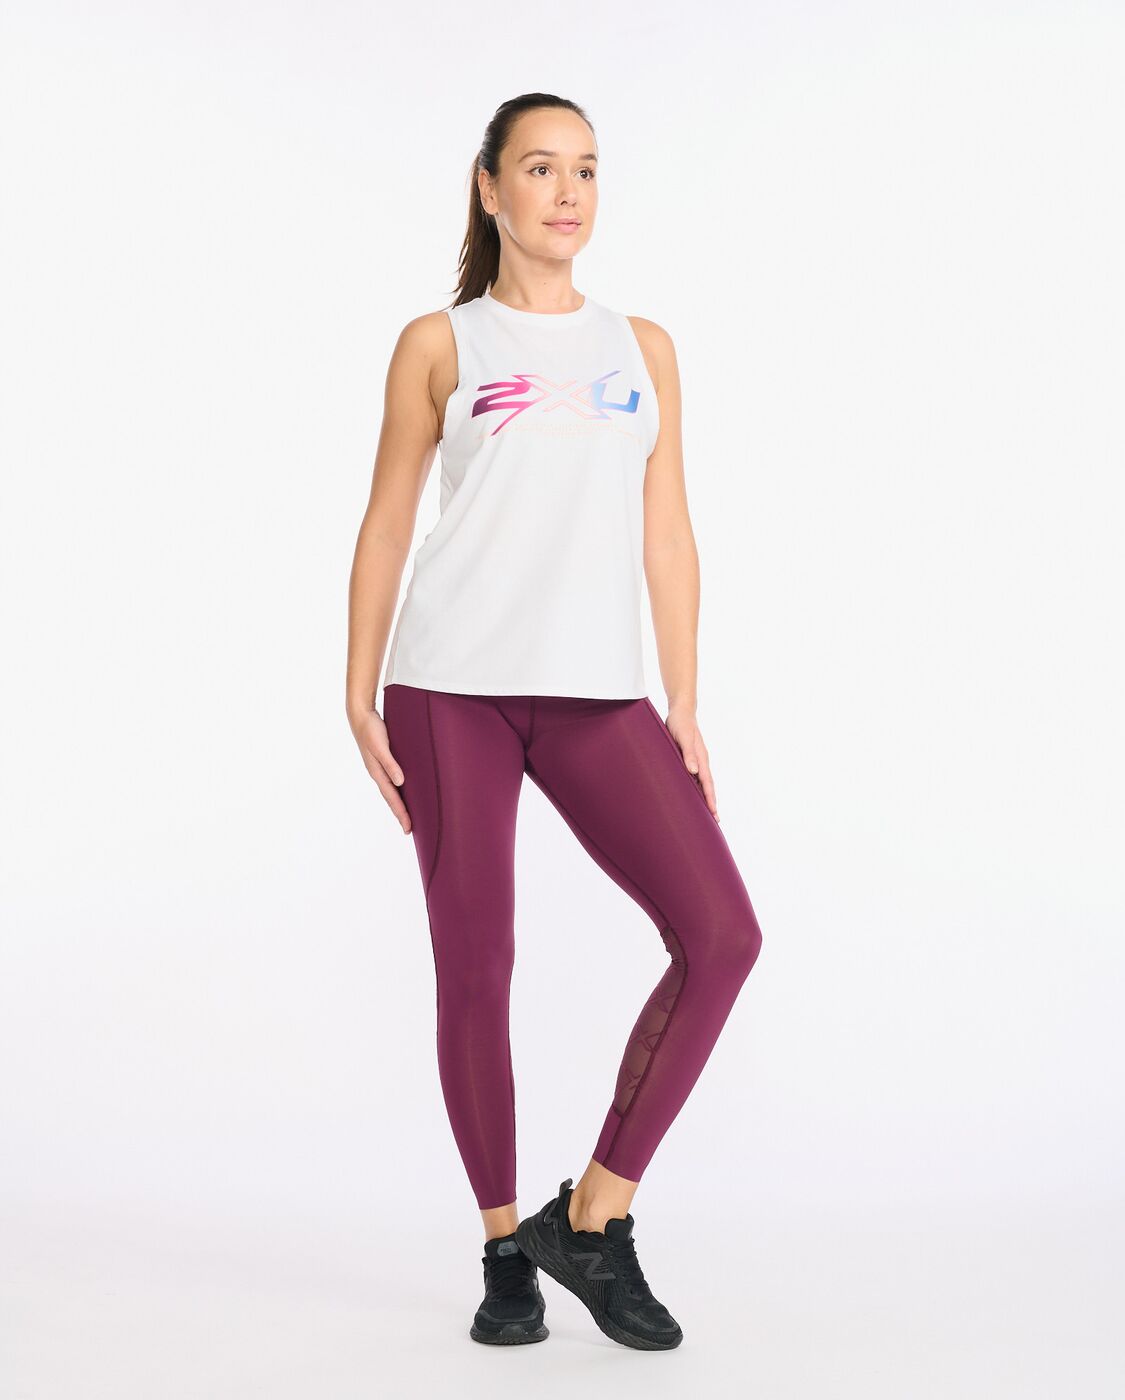 2XU South Africa - Womens Form Tank - White - White/Festival Ombre